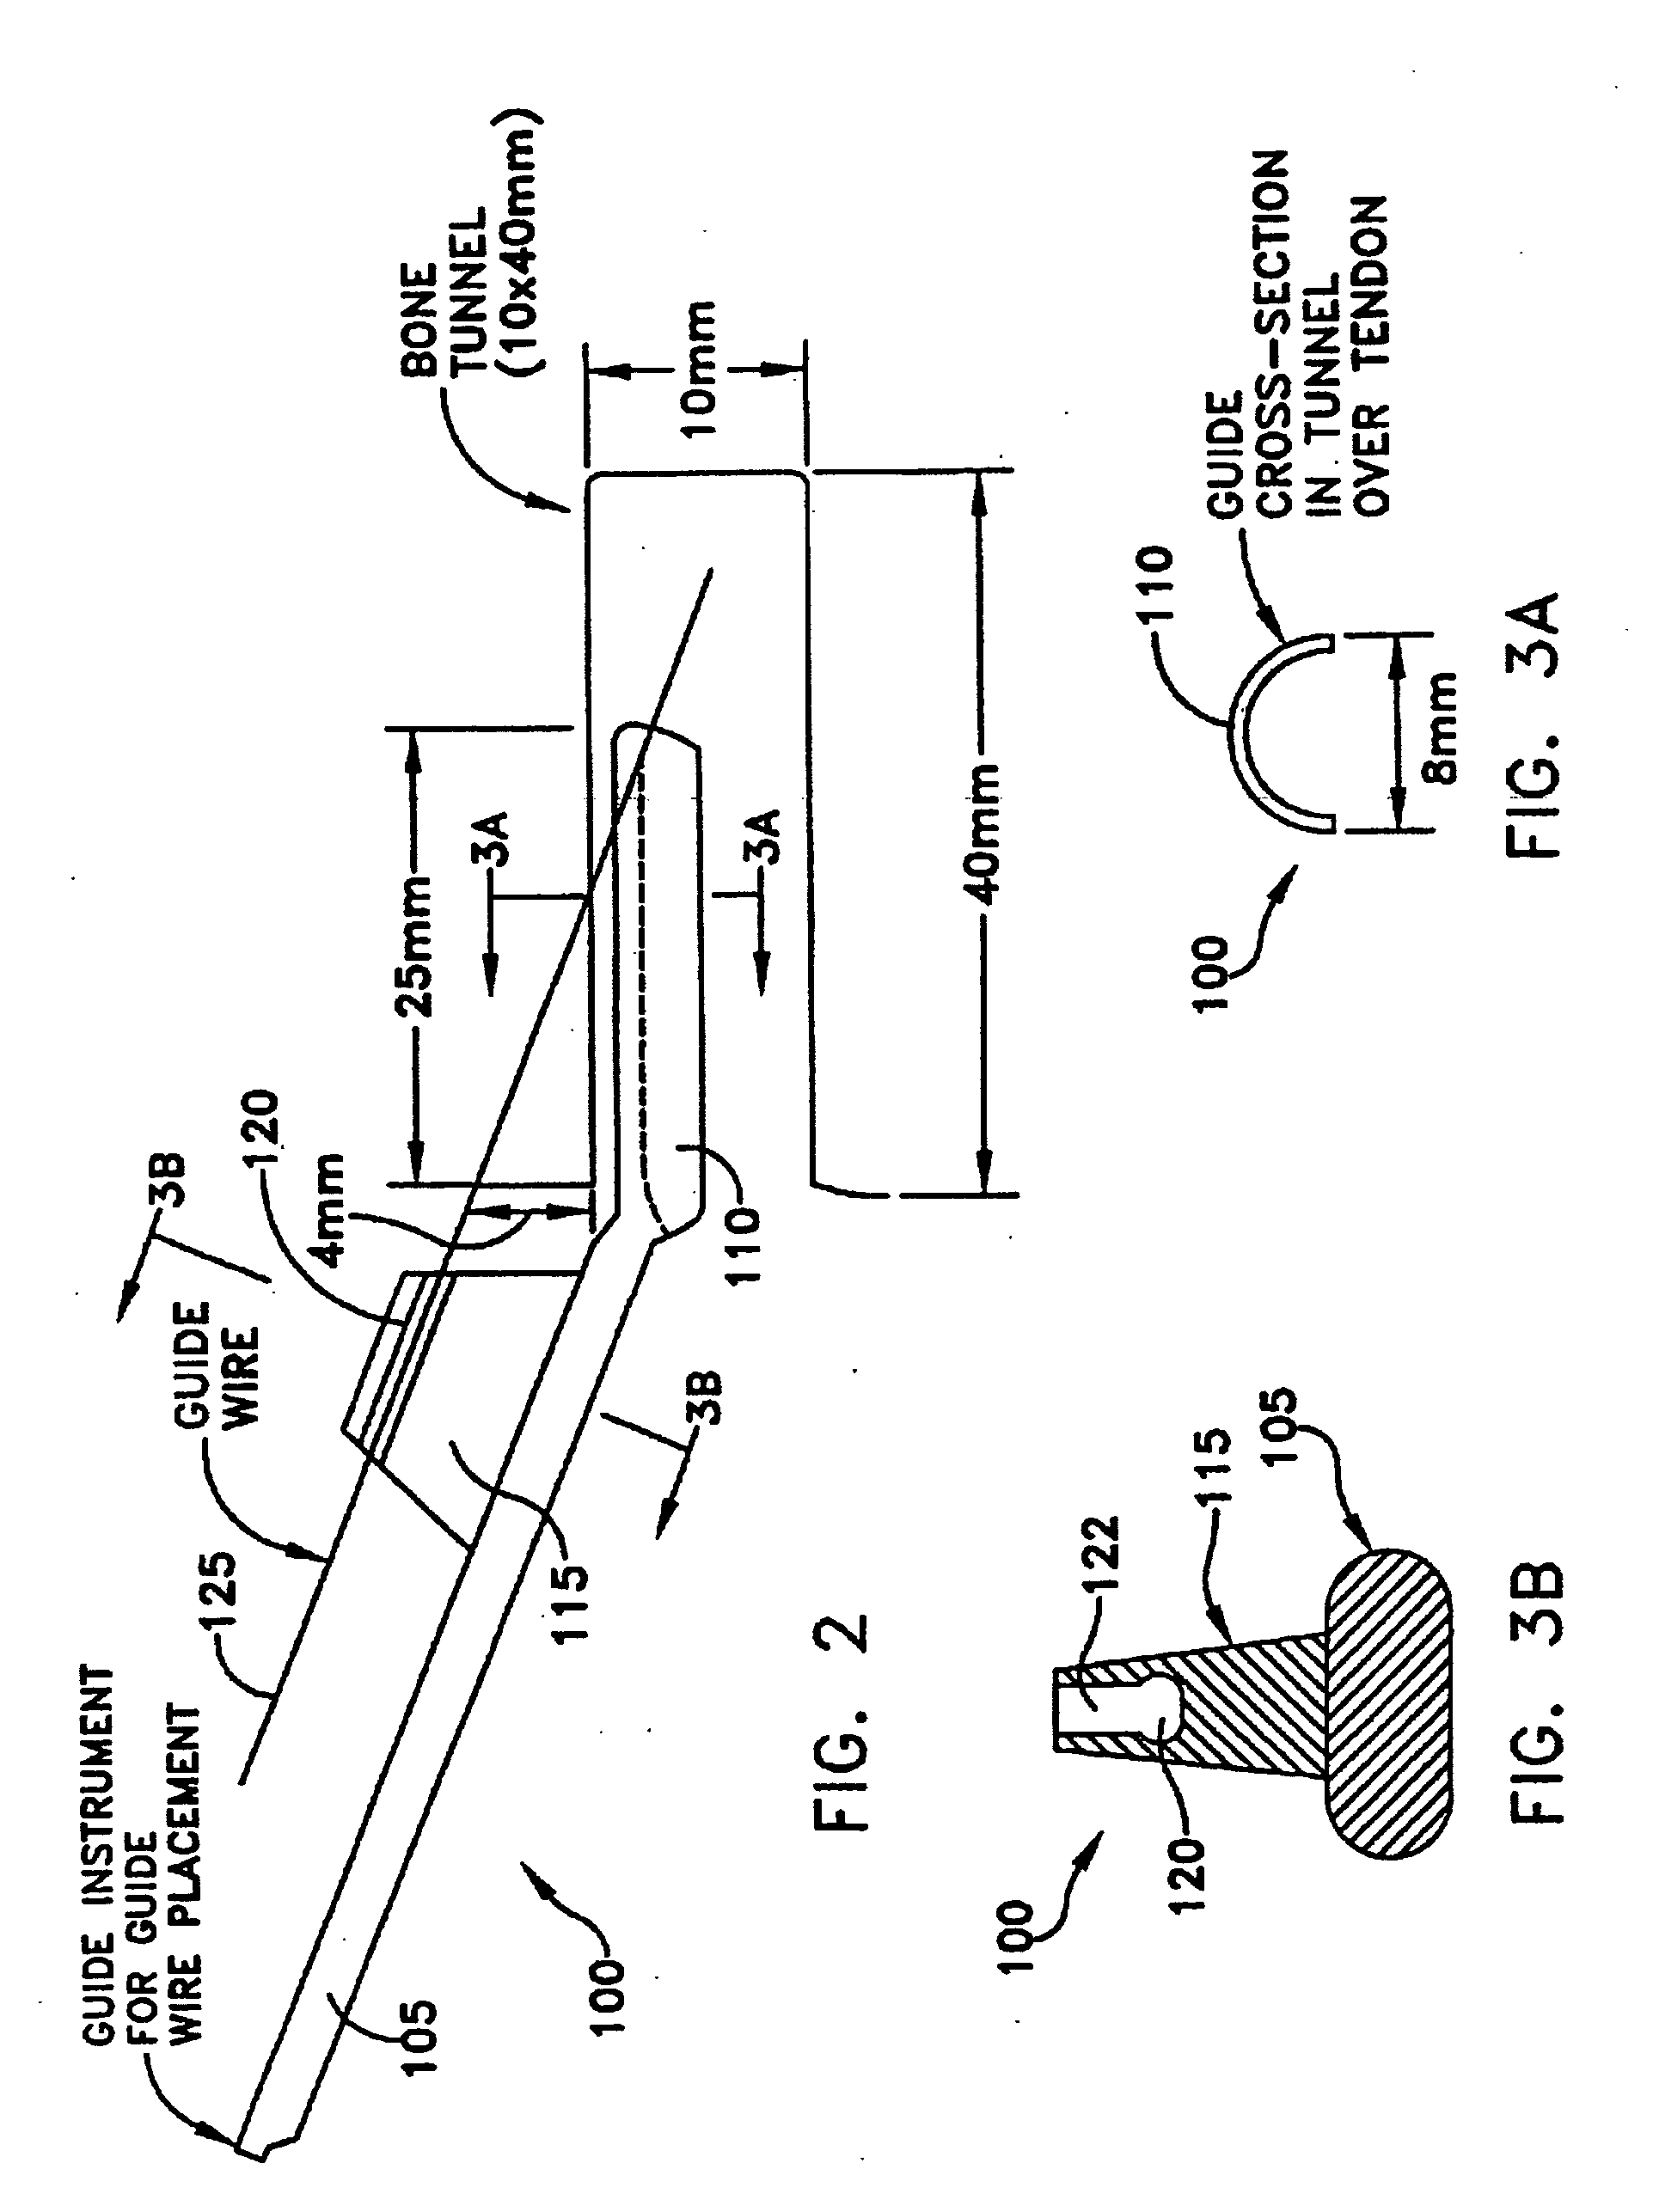 Method and apparatus for reconstructing a ligament